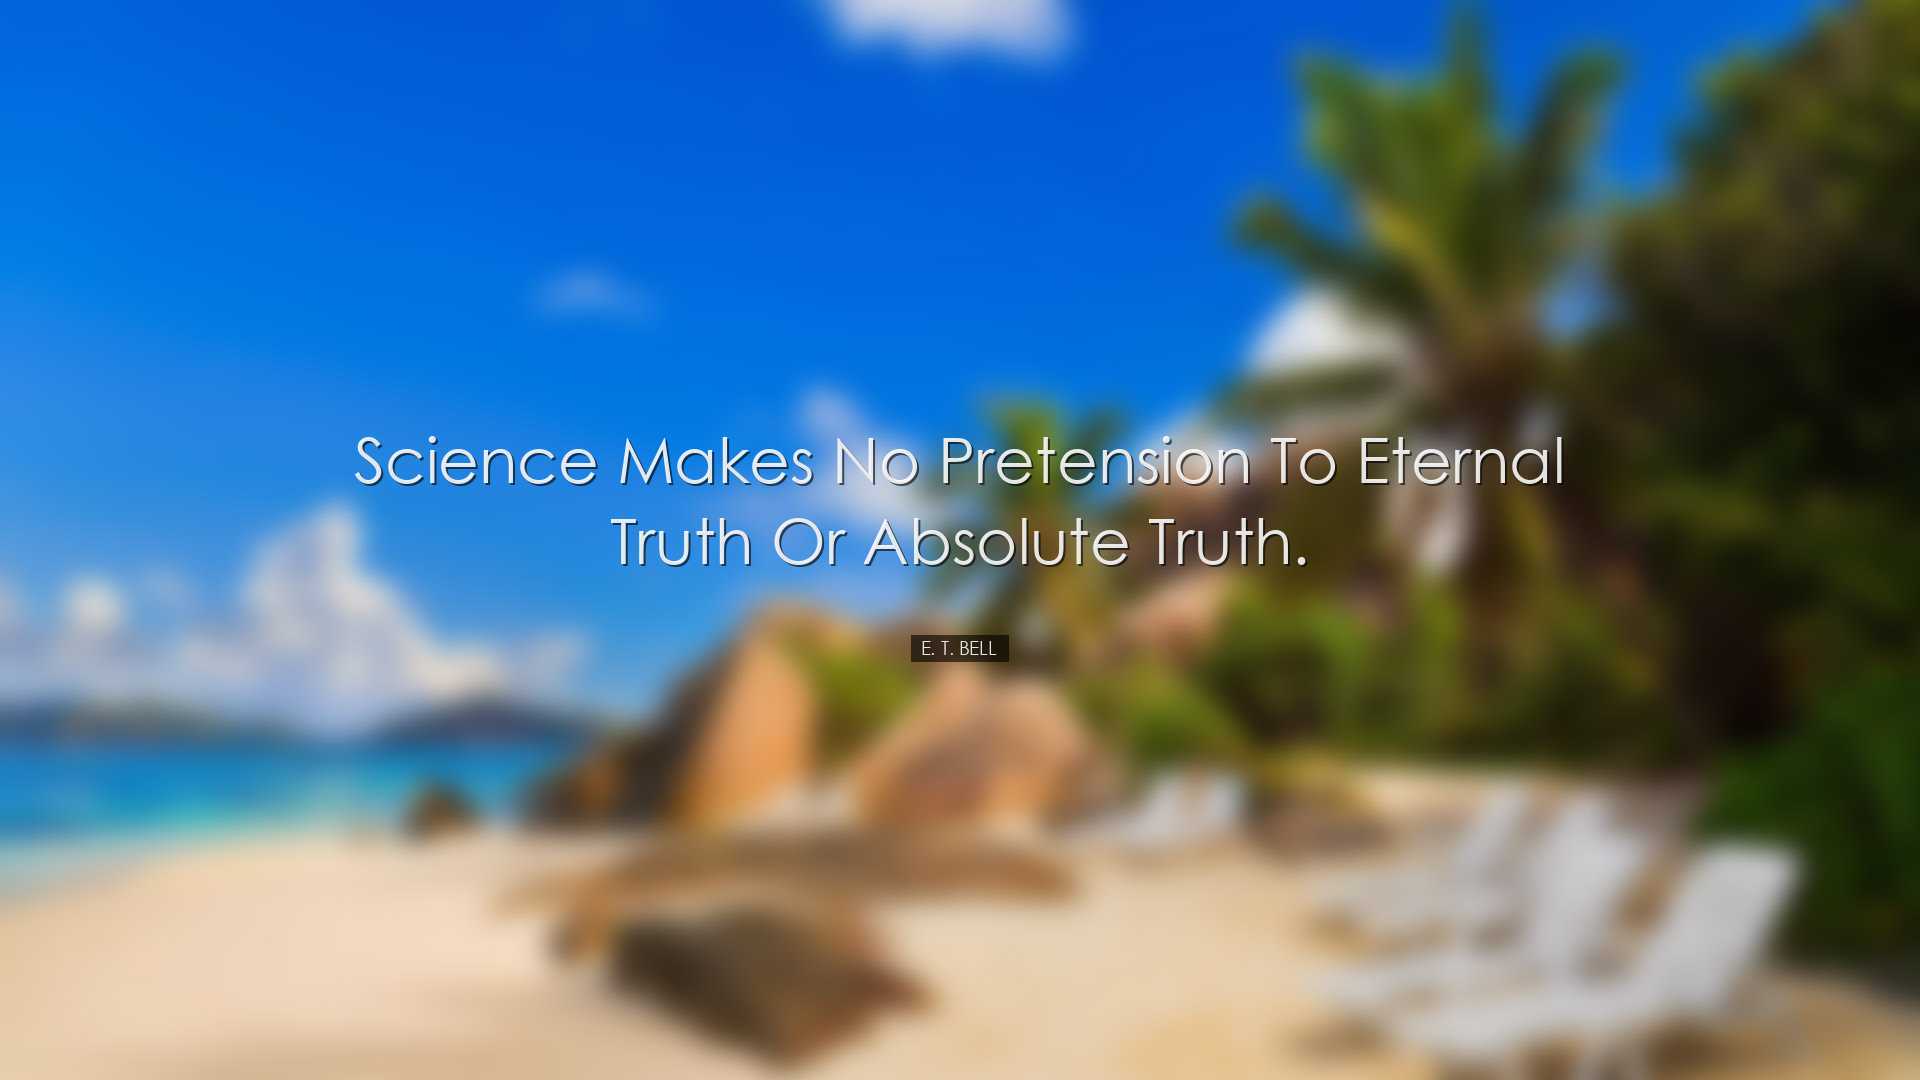 Science makes no pretension to eternal truth or absolute truth. -